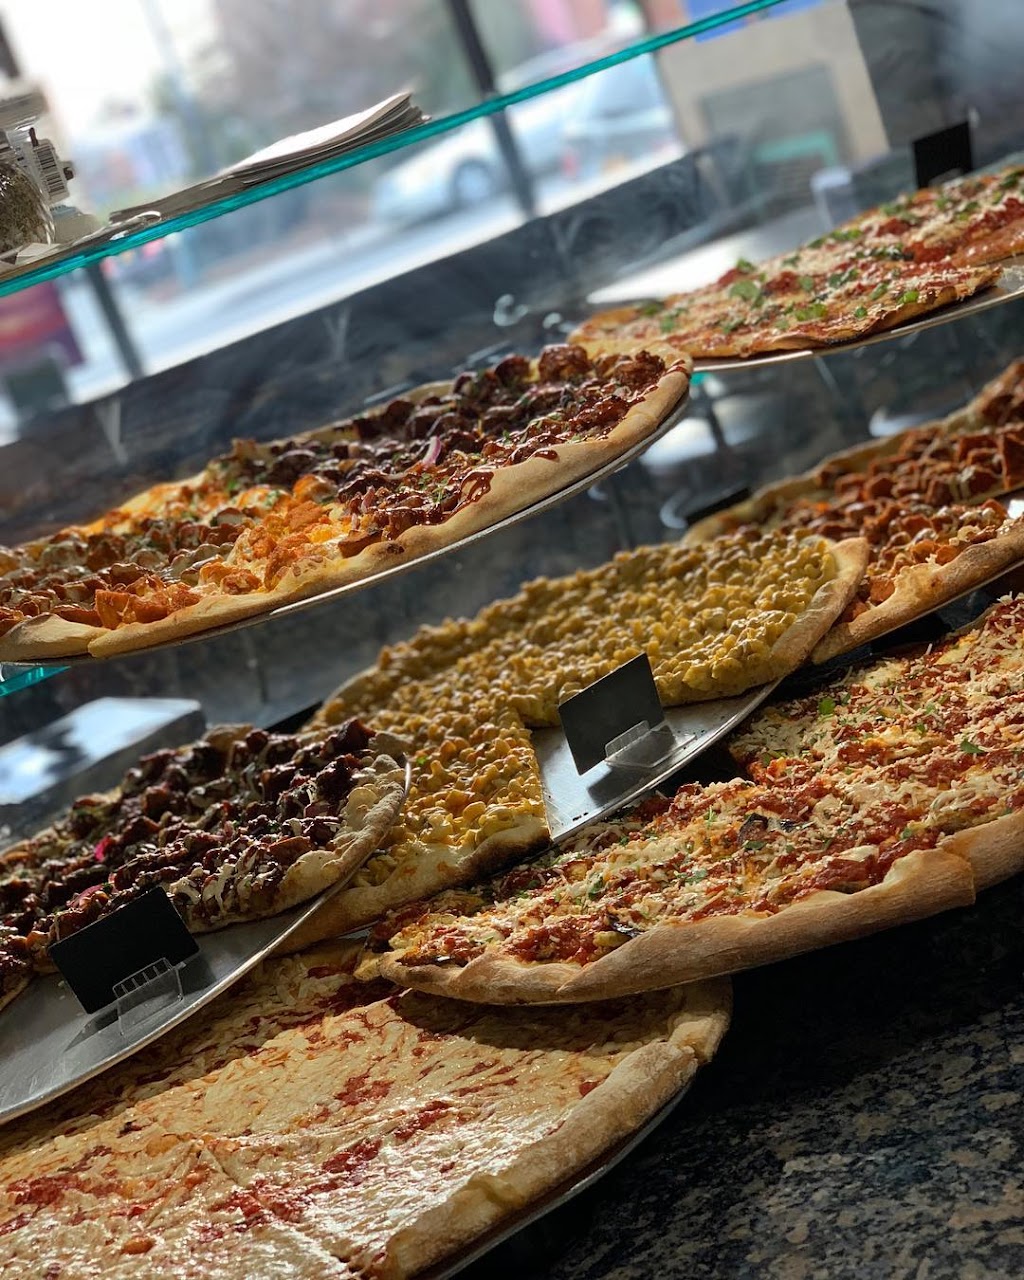 3 Brothers Pizza Cafe | 75 Merritts Rd, Farmingdale, NY 11735 | Phone: (516) 755-1100